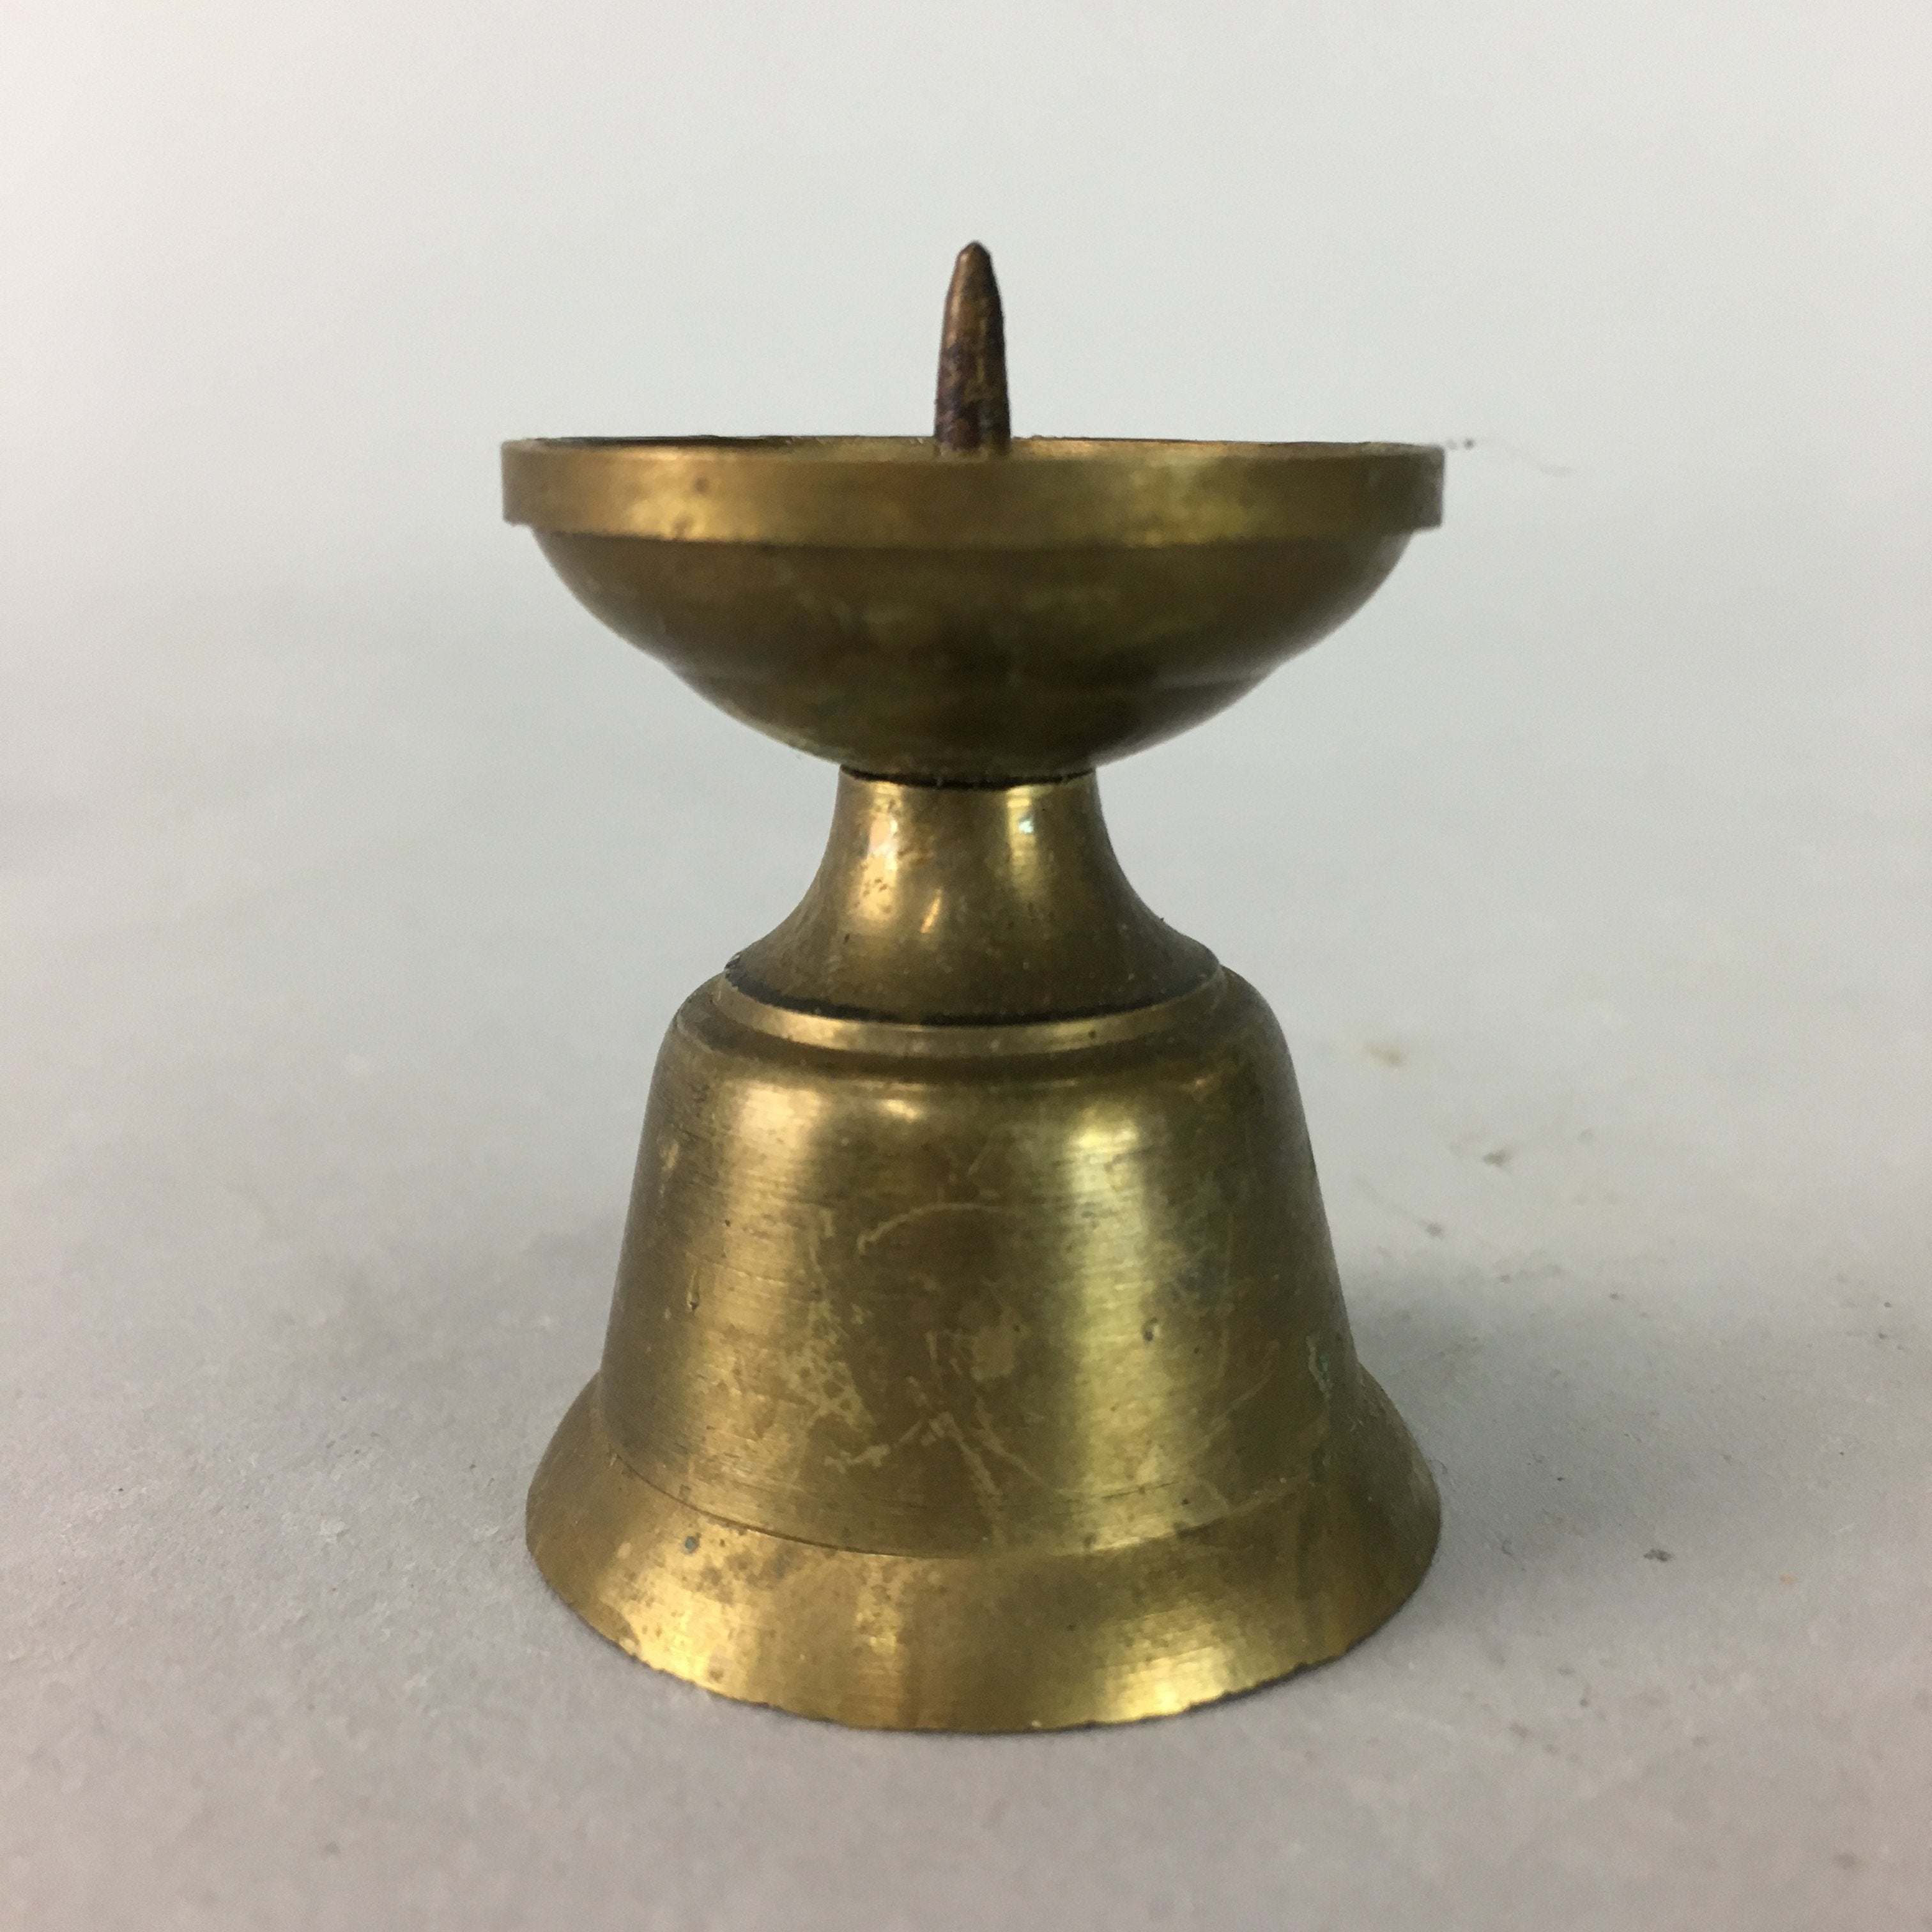 Japanese Buddhist Altar Fitting Brass Candle Stand Vtg Butsudan Accessory B541